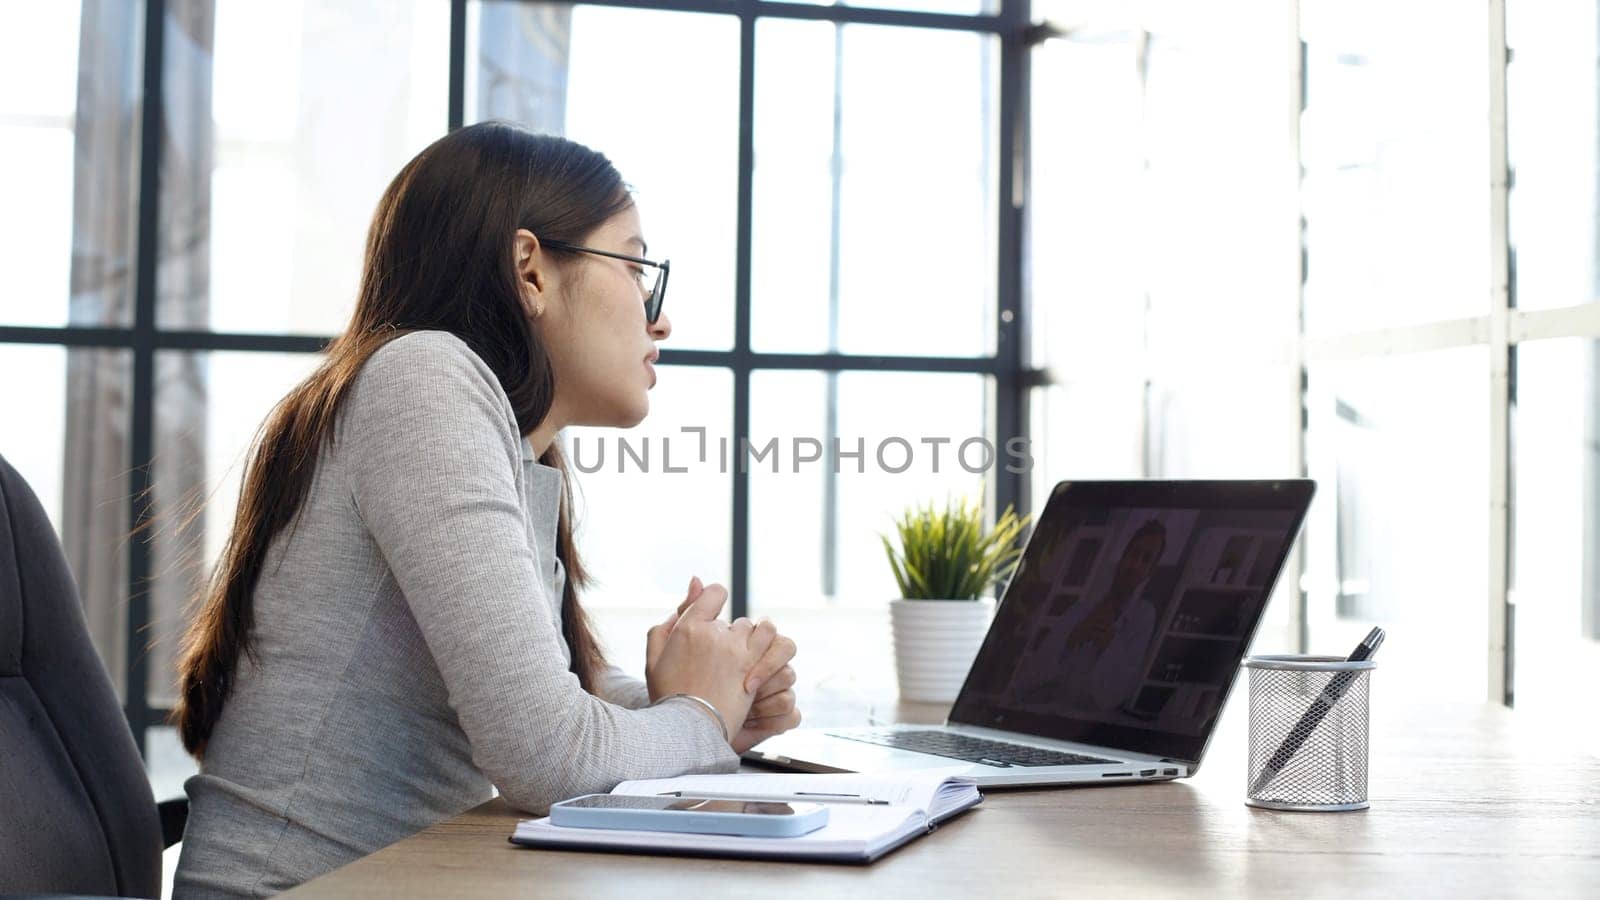 A young woman with glasses in the office is working on a laptop.